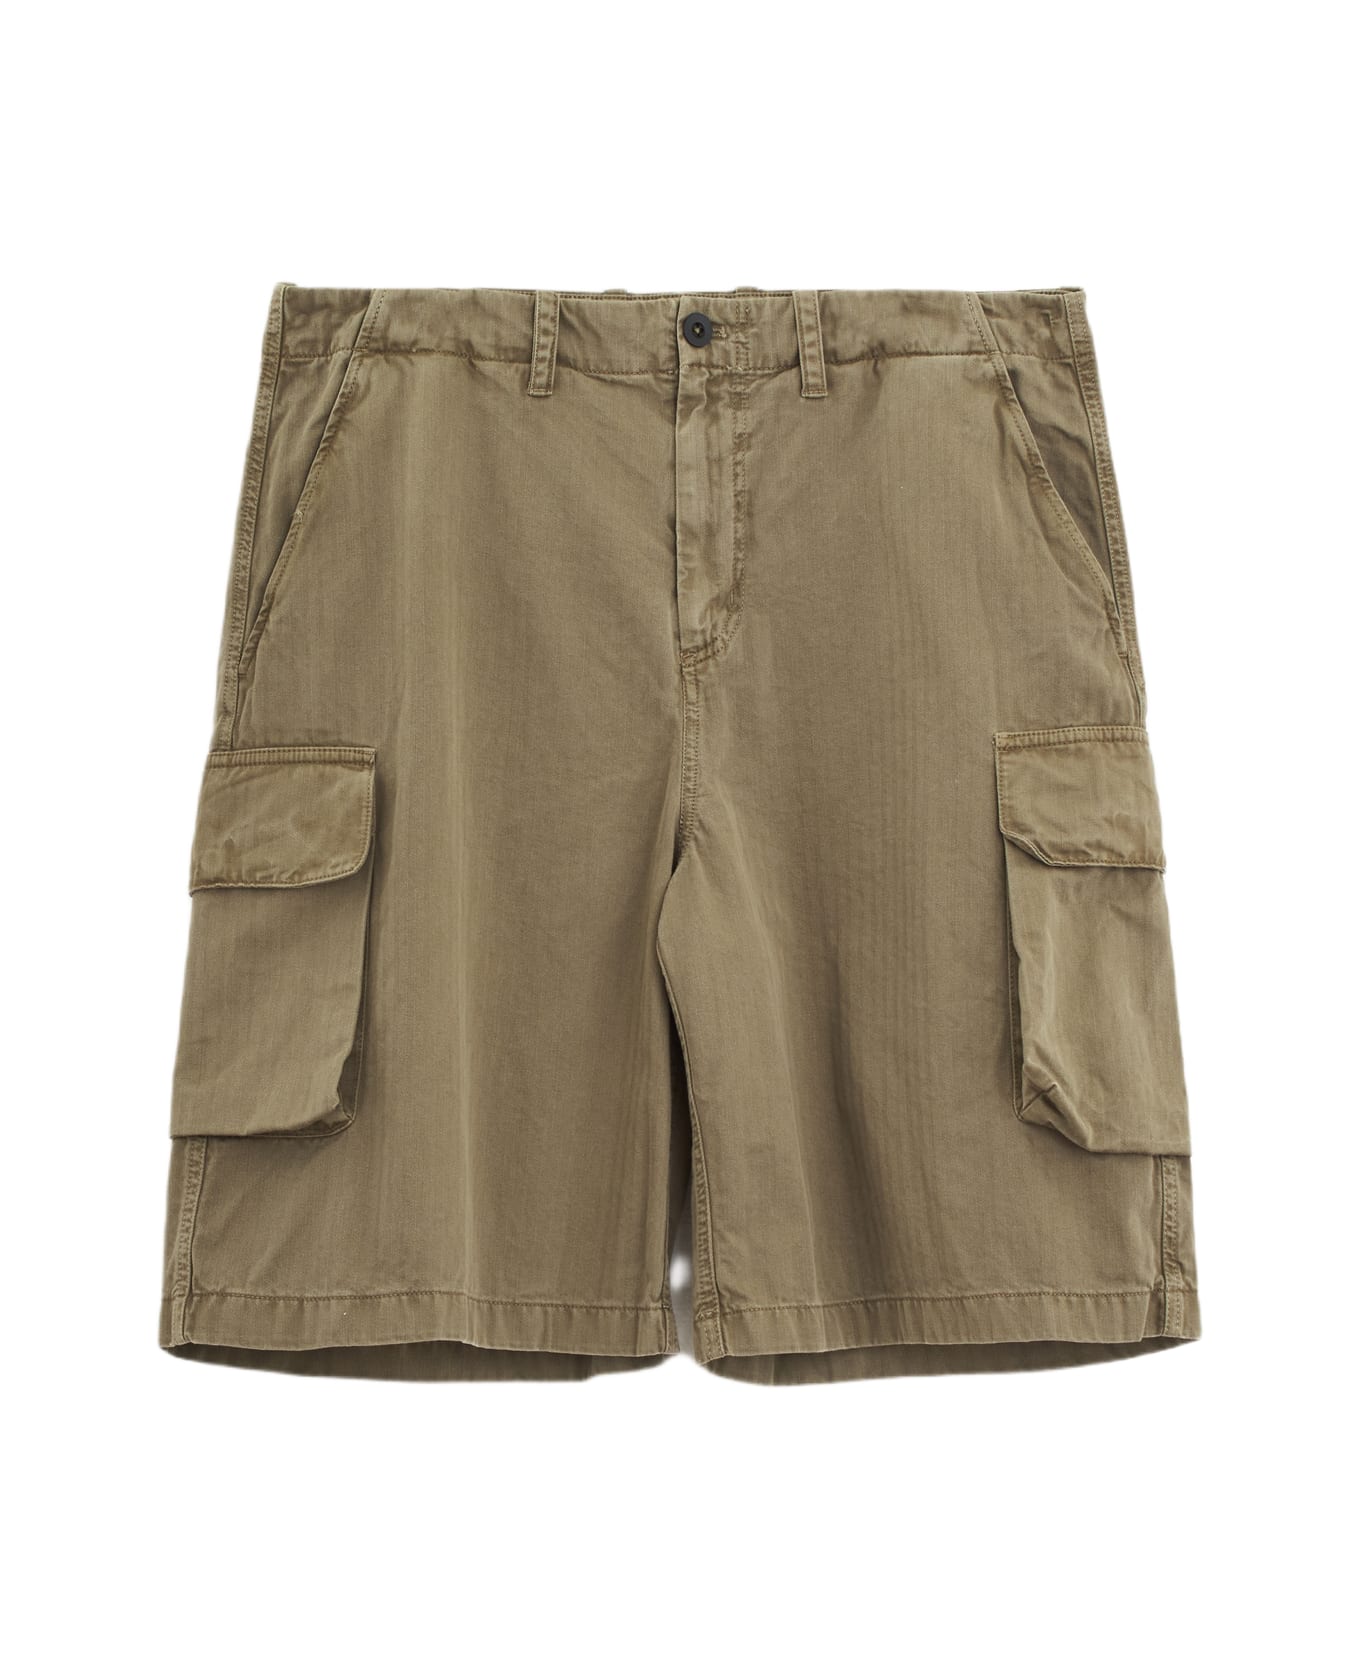 Our Legacy Mount Shorts Shorts - beige ショートパンツ